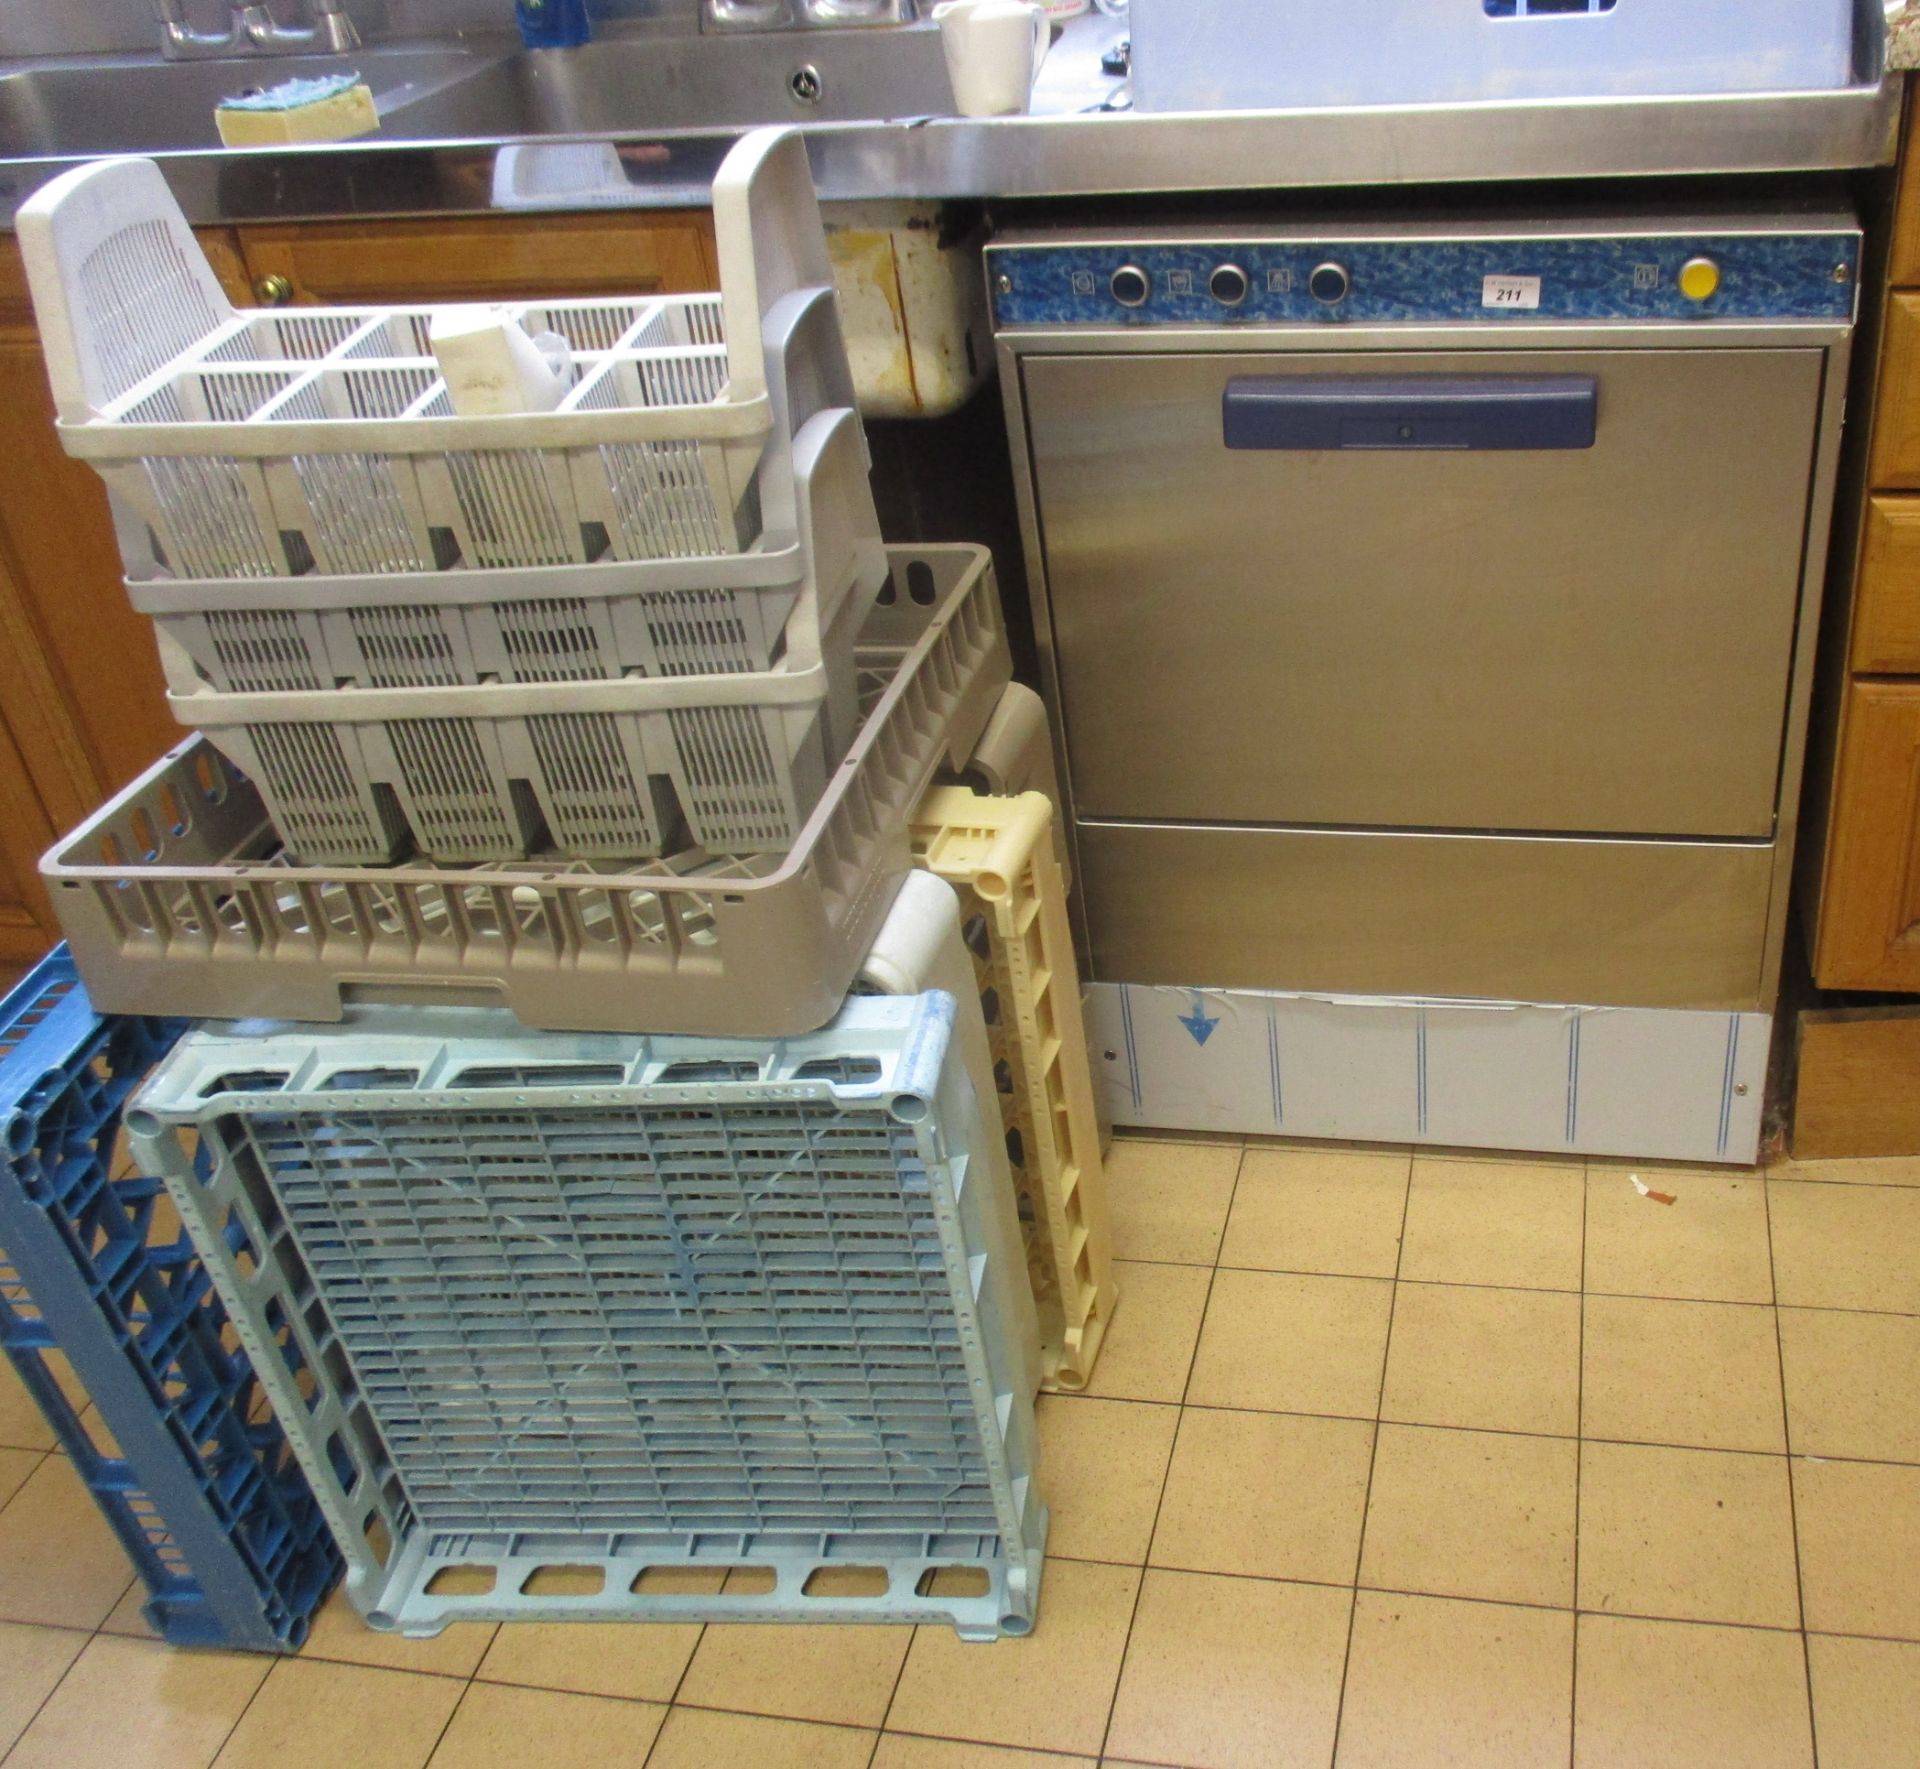 Stainless steel under counter dishwasher and a quantity of plastic trays.